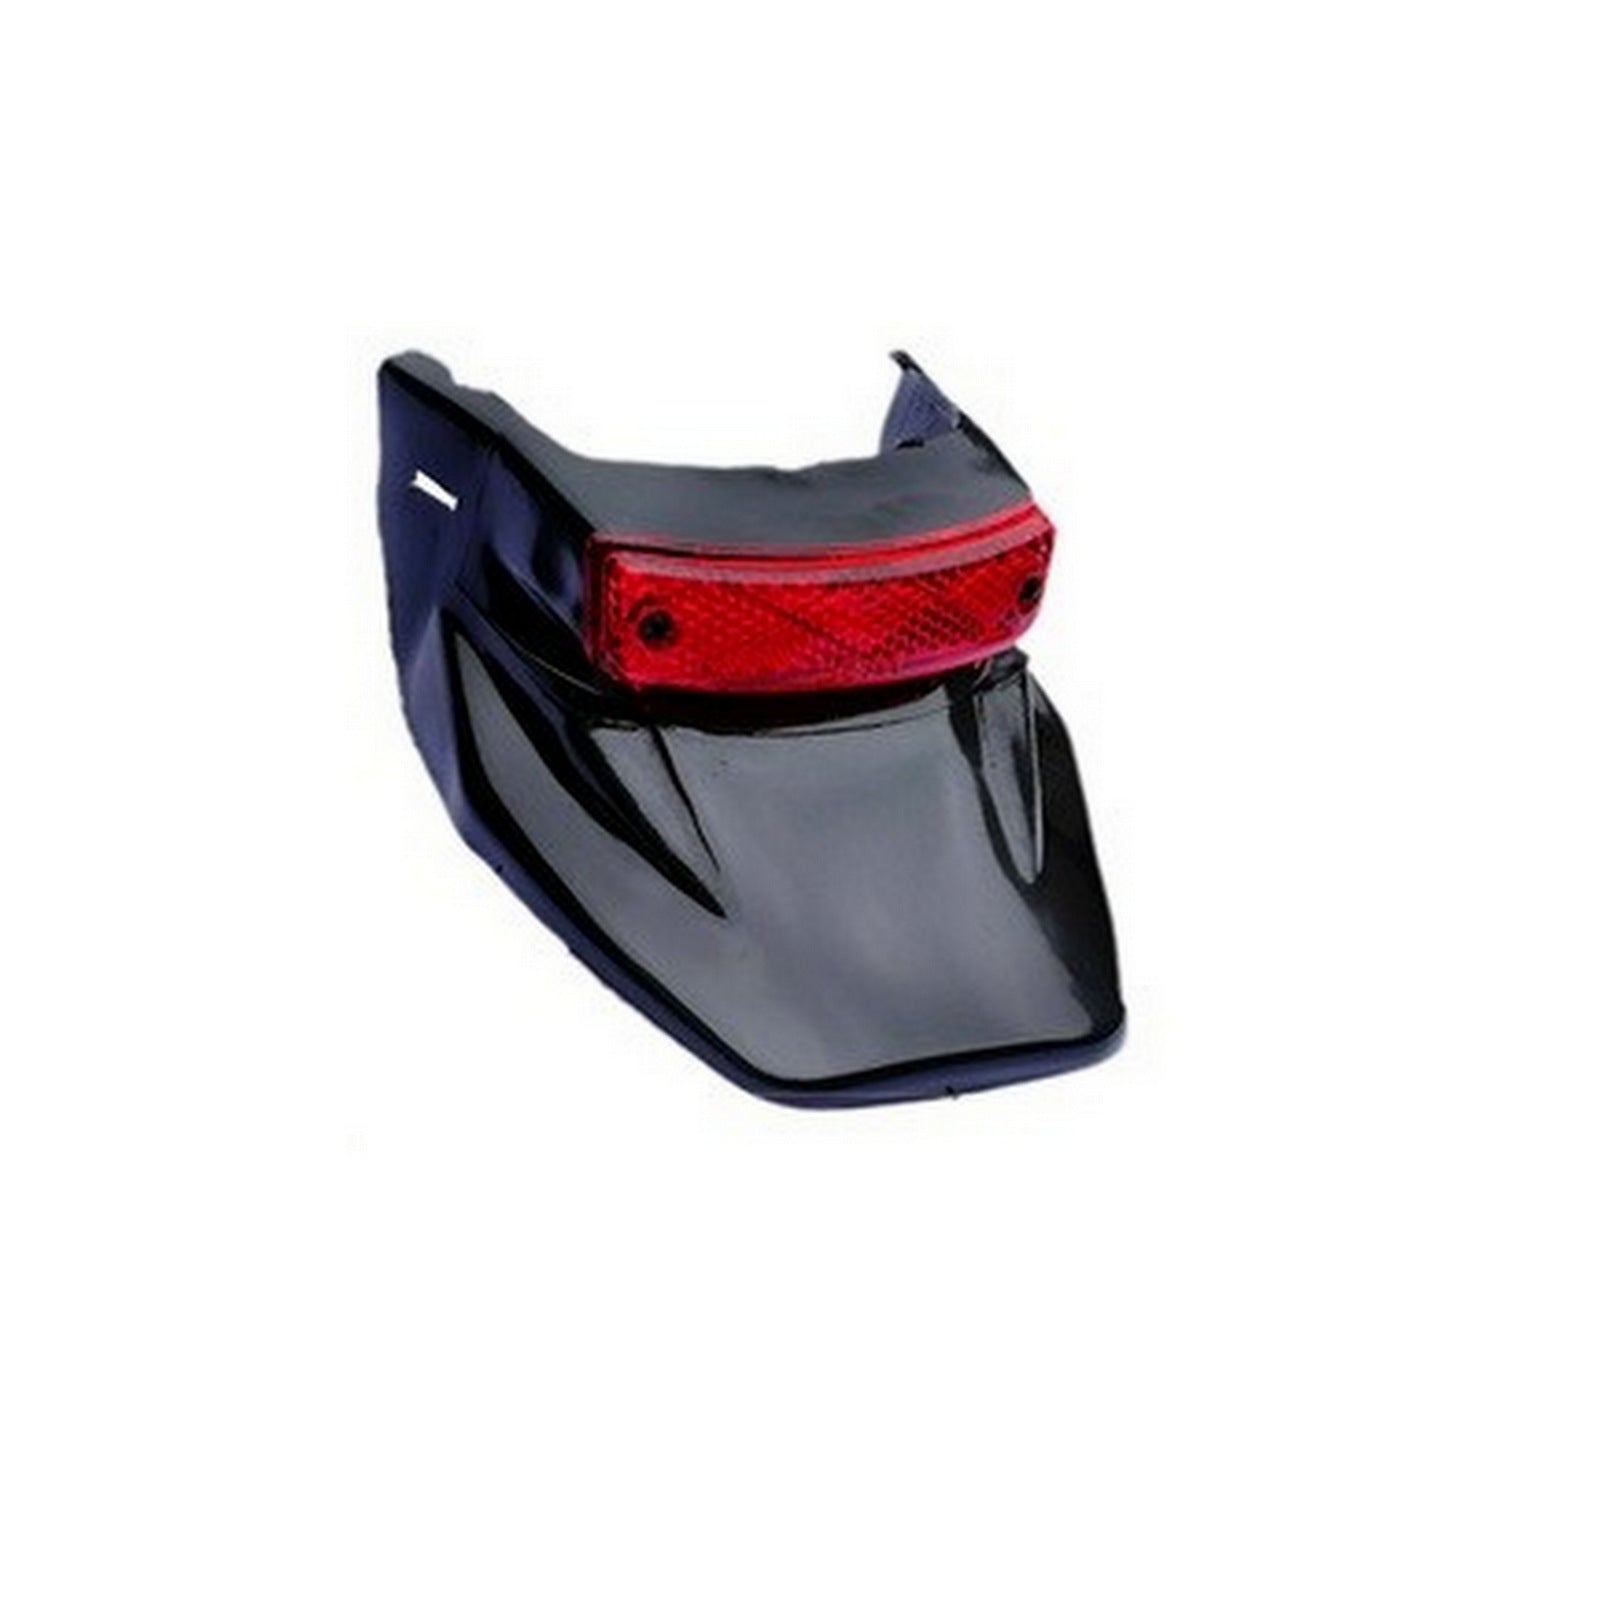 MUD TAIL FRONT WITH REFLECTOR FOR HONDA MOTORCYCLE